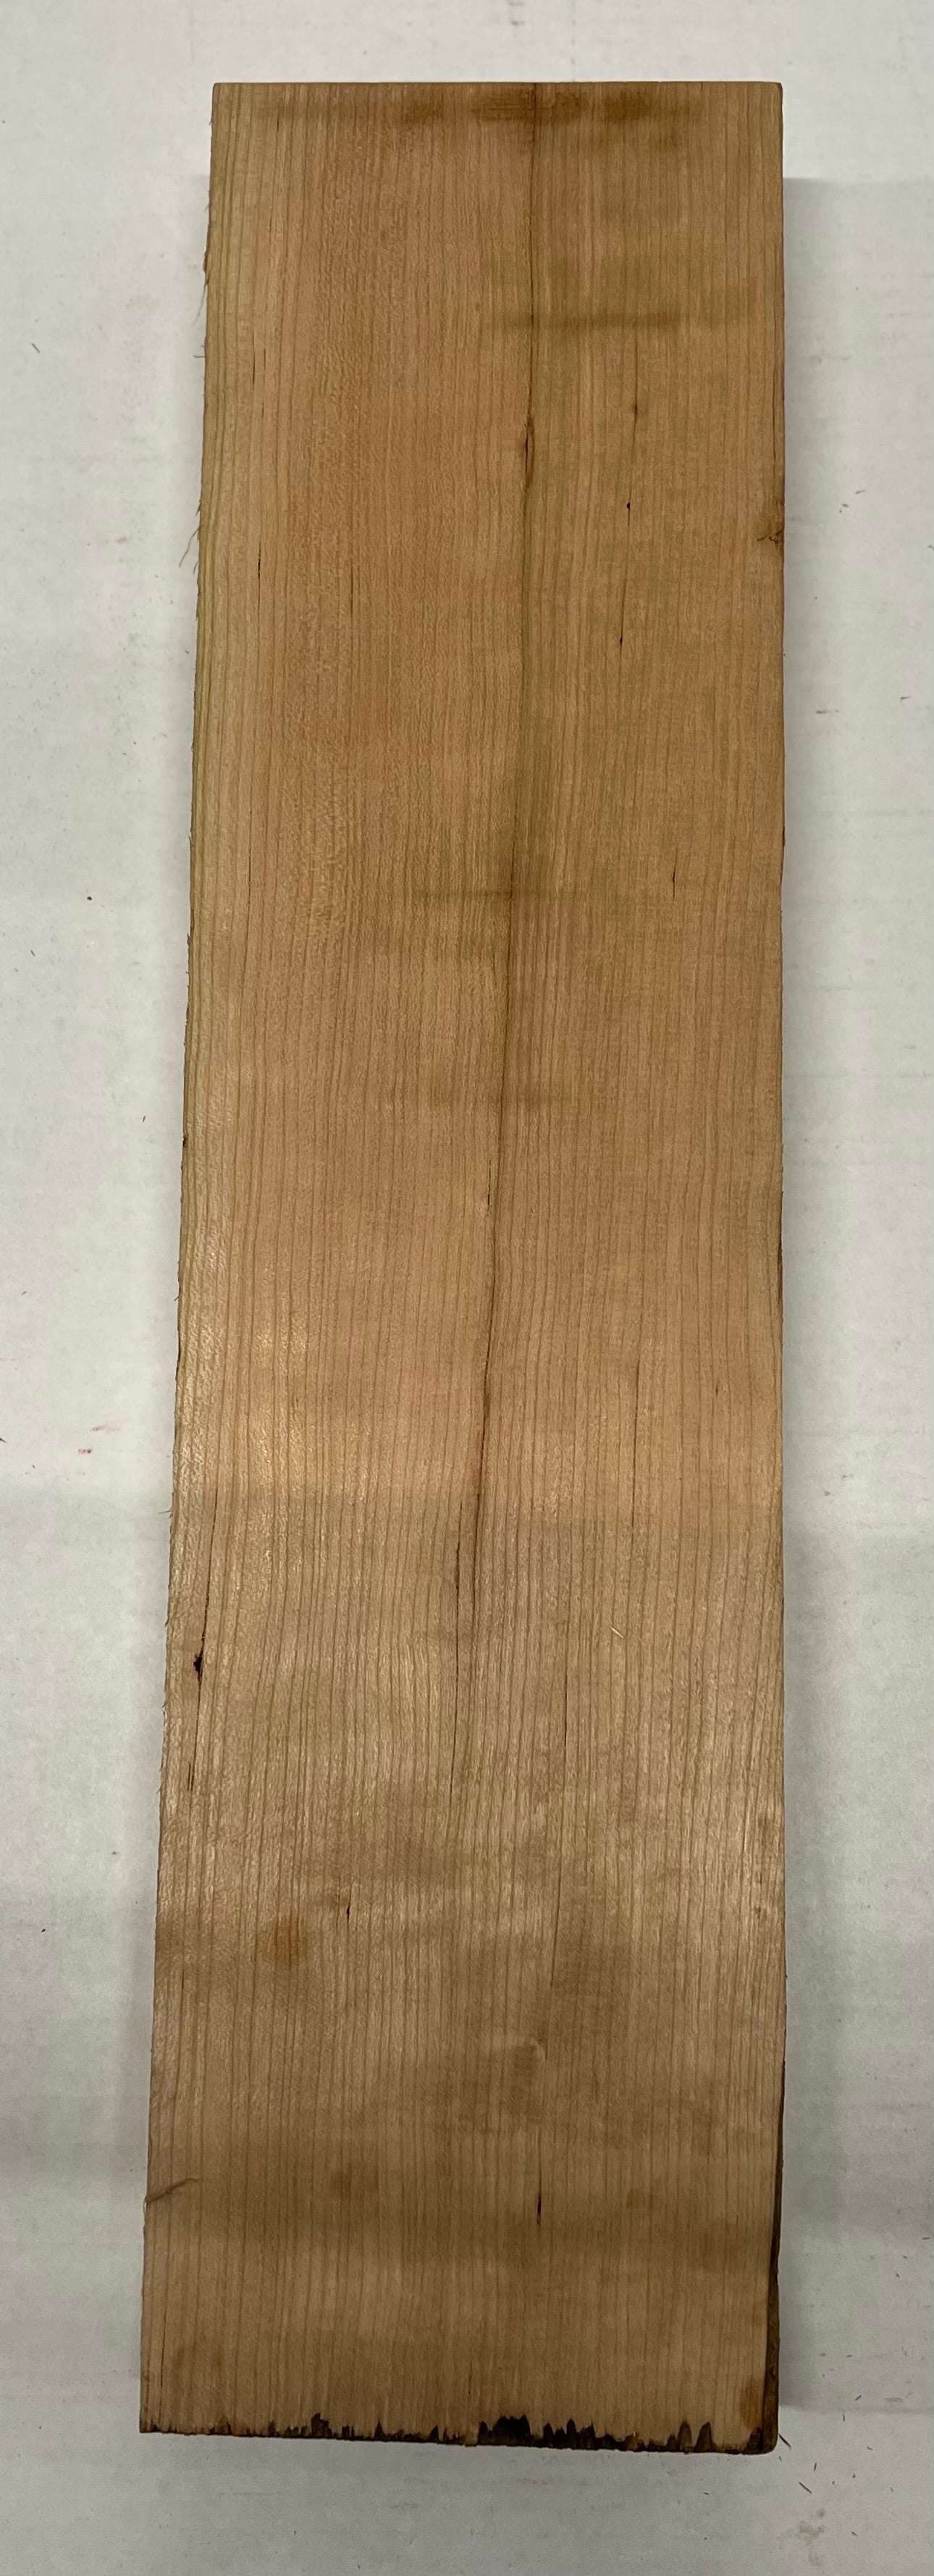 Cherry  Lumber Board Square Wood Blank 25&quot;x6-1/2&quot;x2&quot;  